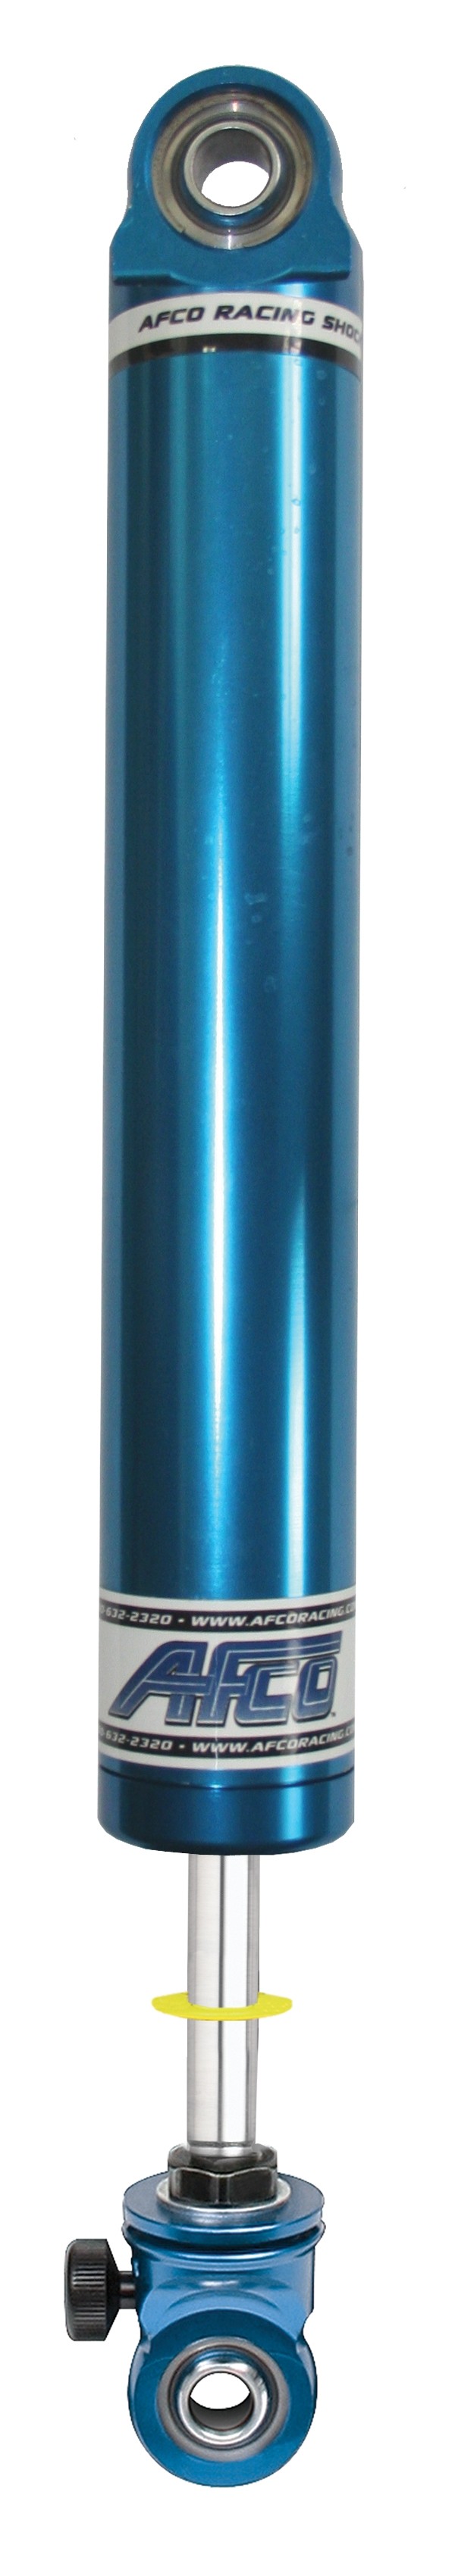 Aluminum Shock Twin Tube 16 Series Small Body 7 Inch Comp 3/Reb 4-8 Smooth